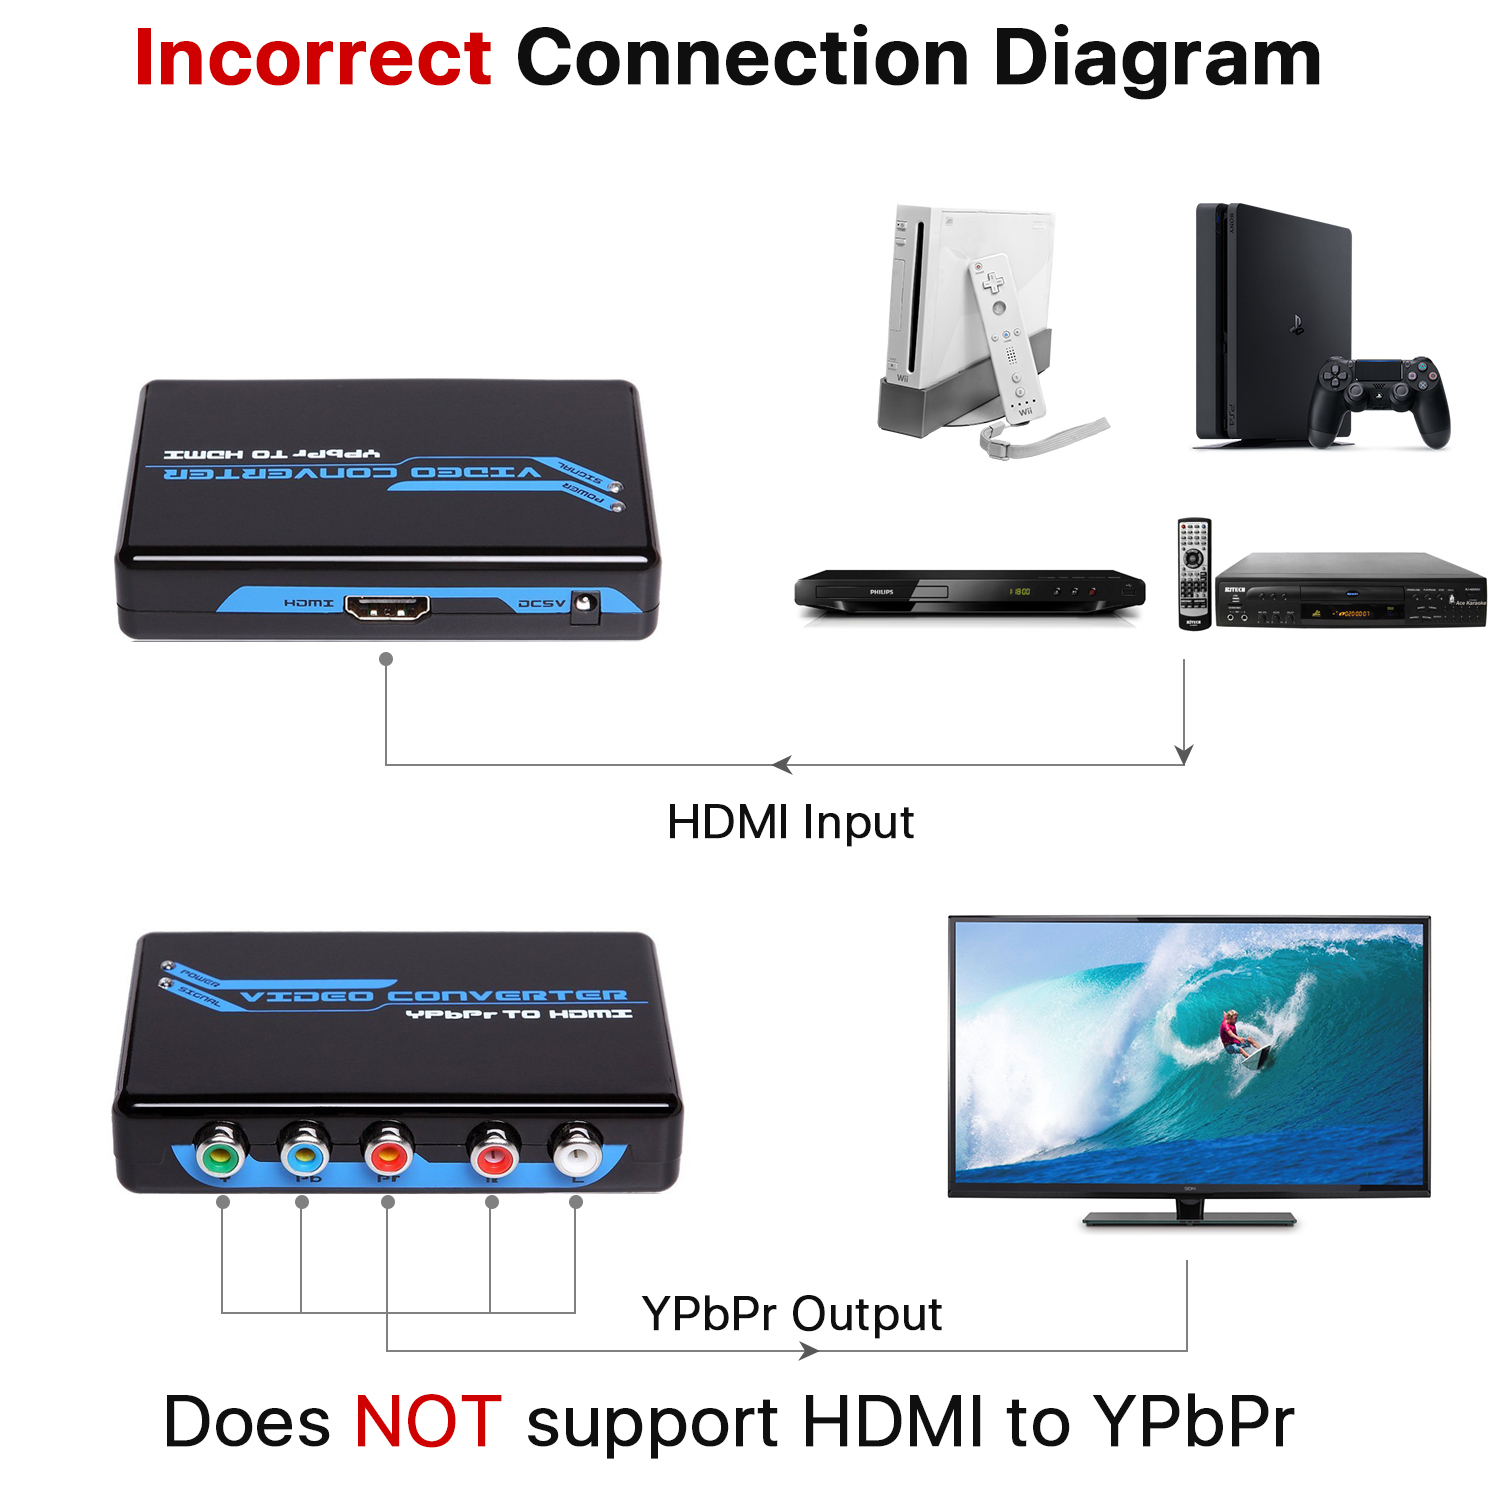 This adapter connects component video home theater devices to HDMI compliant HD TV, digital monitors, displays